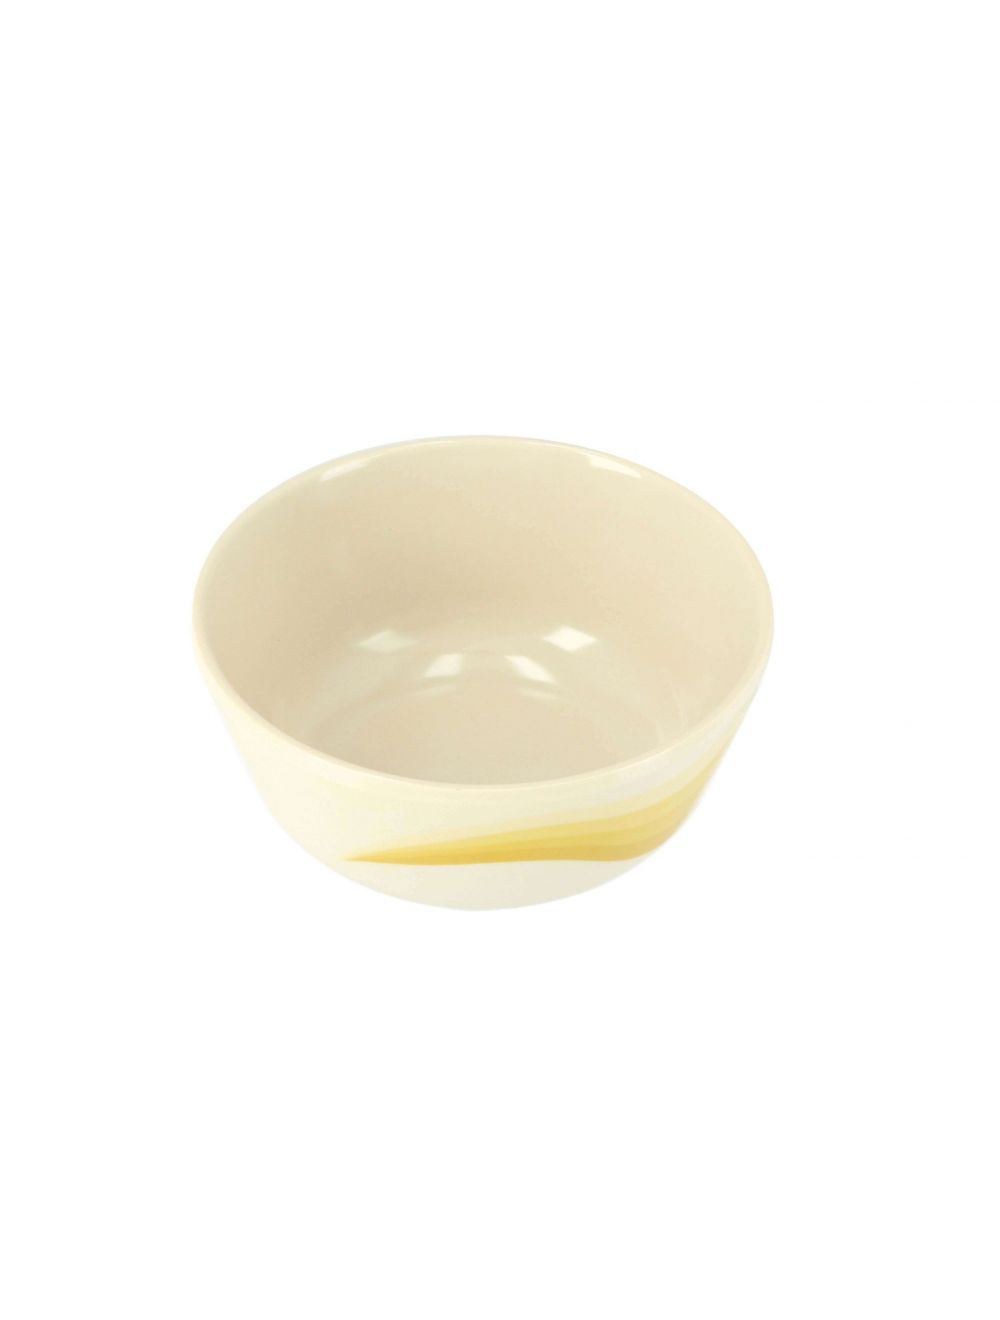 Royalford RF8048 Royalford 4.5" Melamine Ware Super Rays Round Bowl Portable Lightweight Bowl Breakfast Cereal